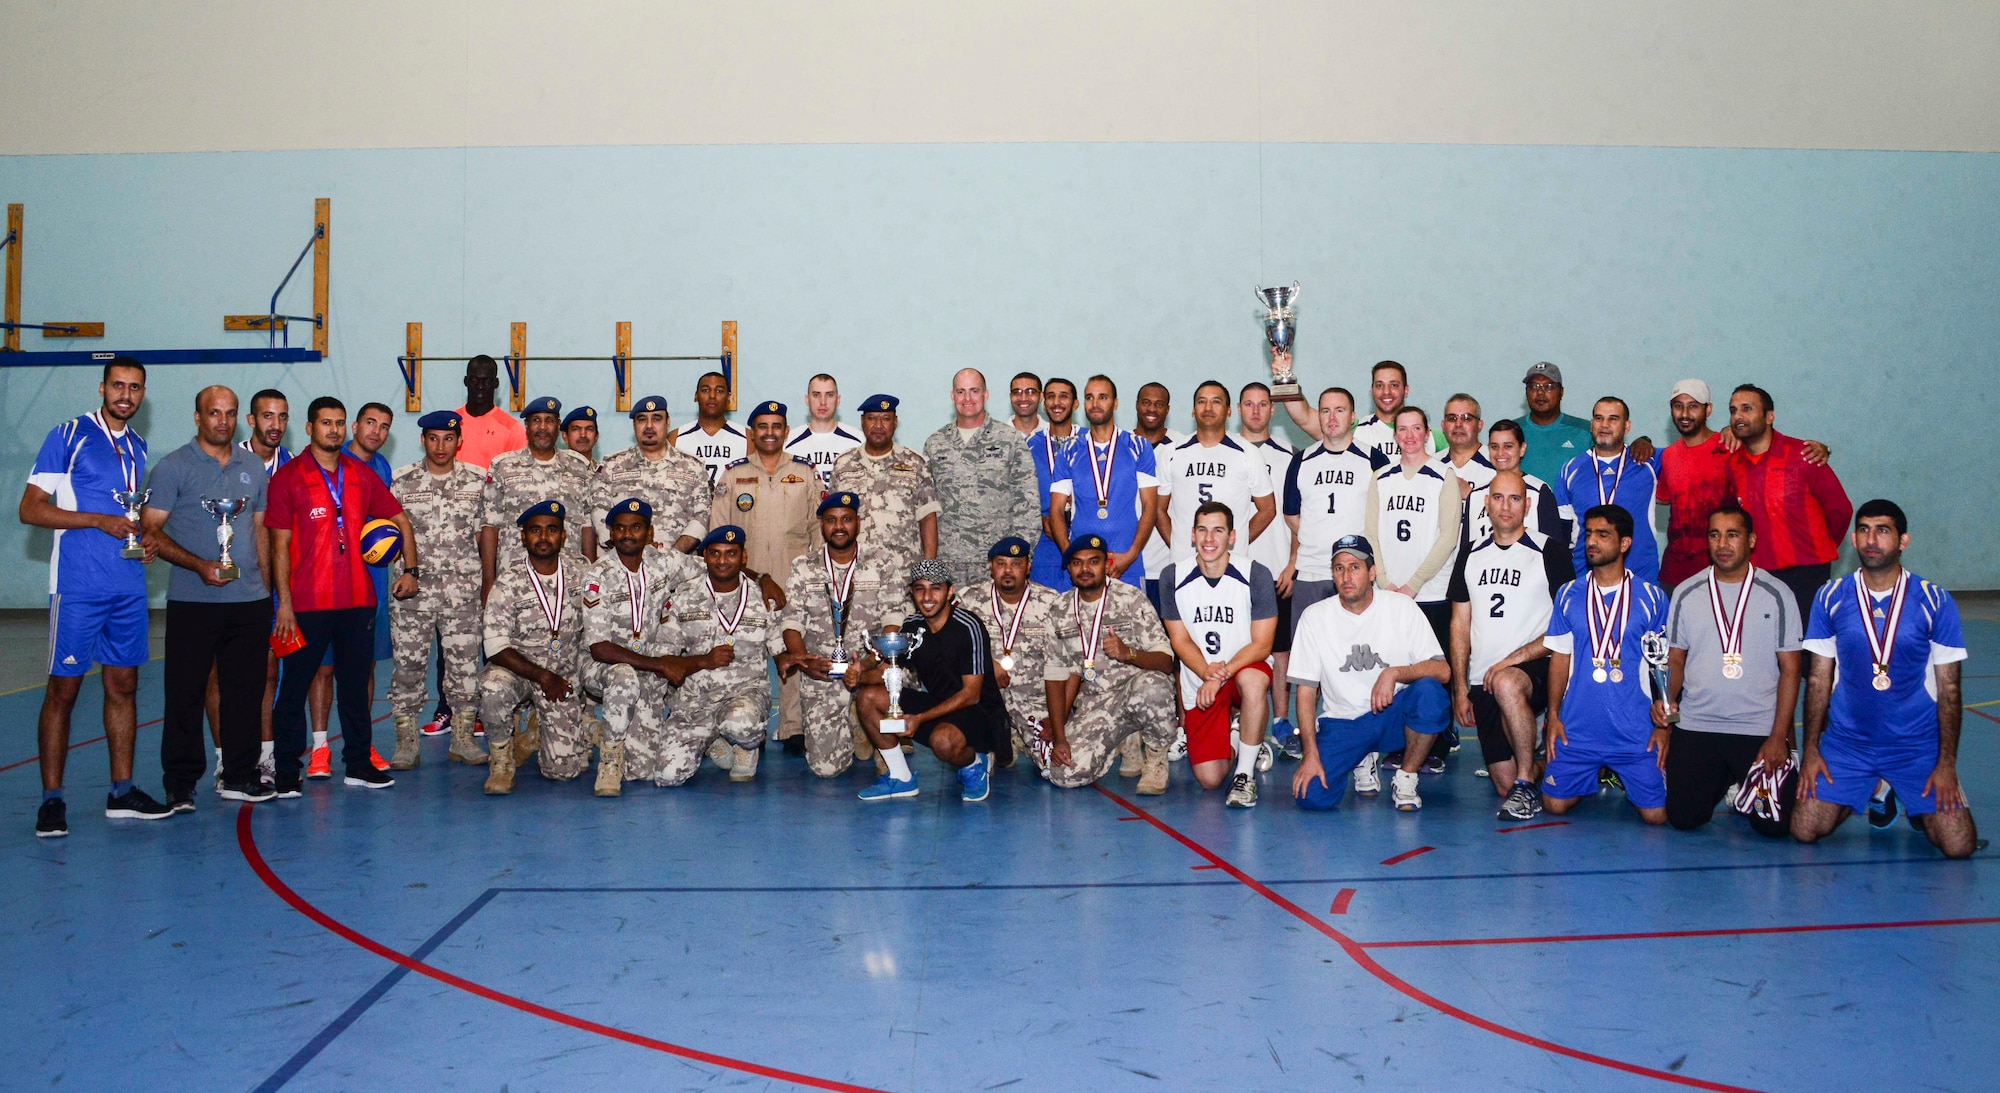 Members of Al Udeid Air Base and Qatar Emiri Air Force pose for a photo after a volleyball tournament June 7, 2016, at Al Udeid Air Base, Qatar. The QEAF hosted the game to bolster the partnership and build friendships between the U.S. and Qatari military. The U.S. team took first place at the tournament. (U.S. Air Force photo/Senior Airman Janelle Patiño/Released)